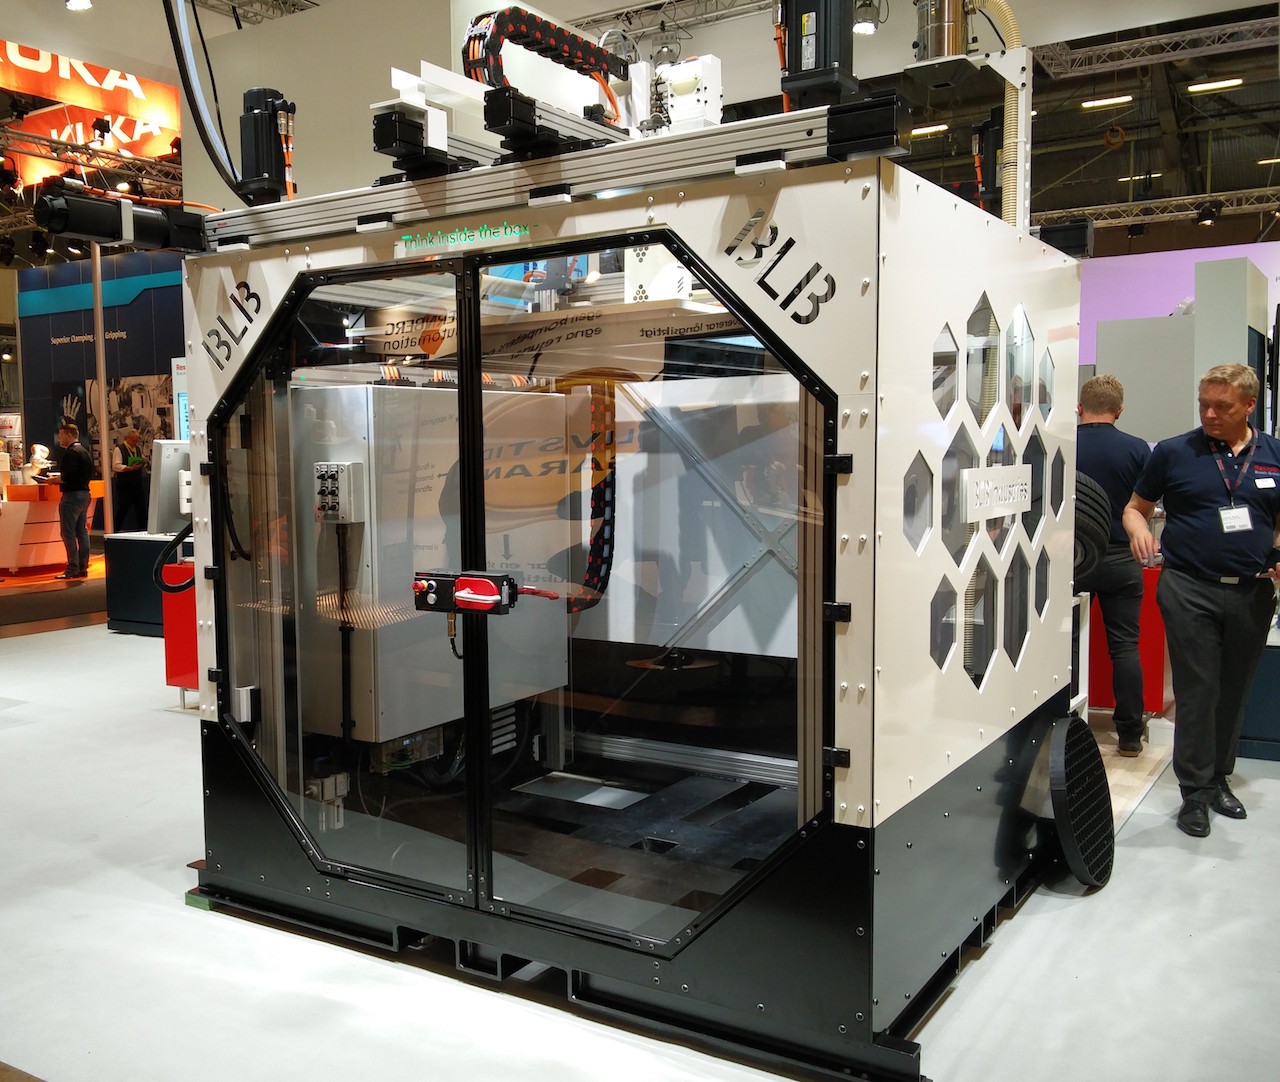 Another Massive 3D Printer: The Box « Fabbaloo - Theboxov Img 5eb0baccb8604